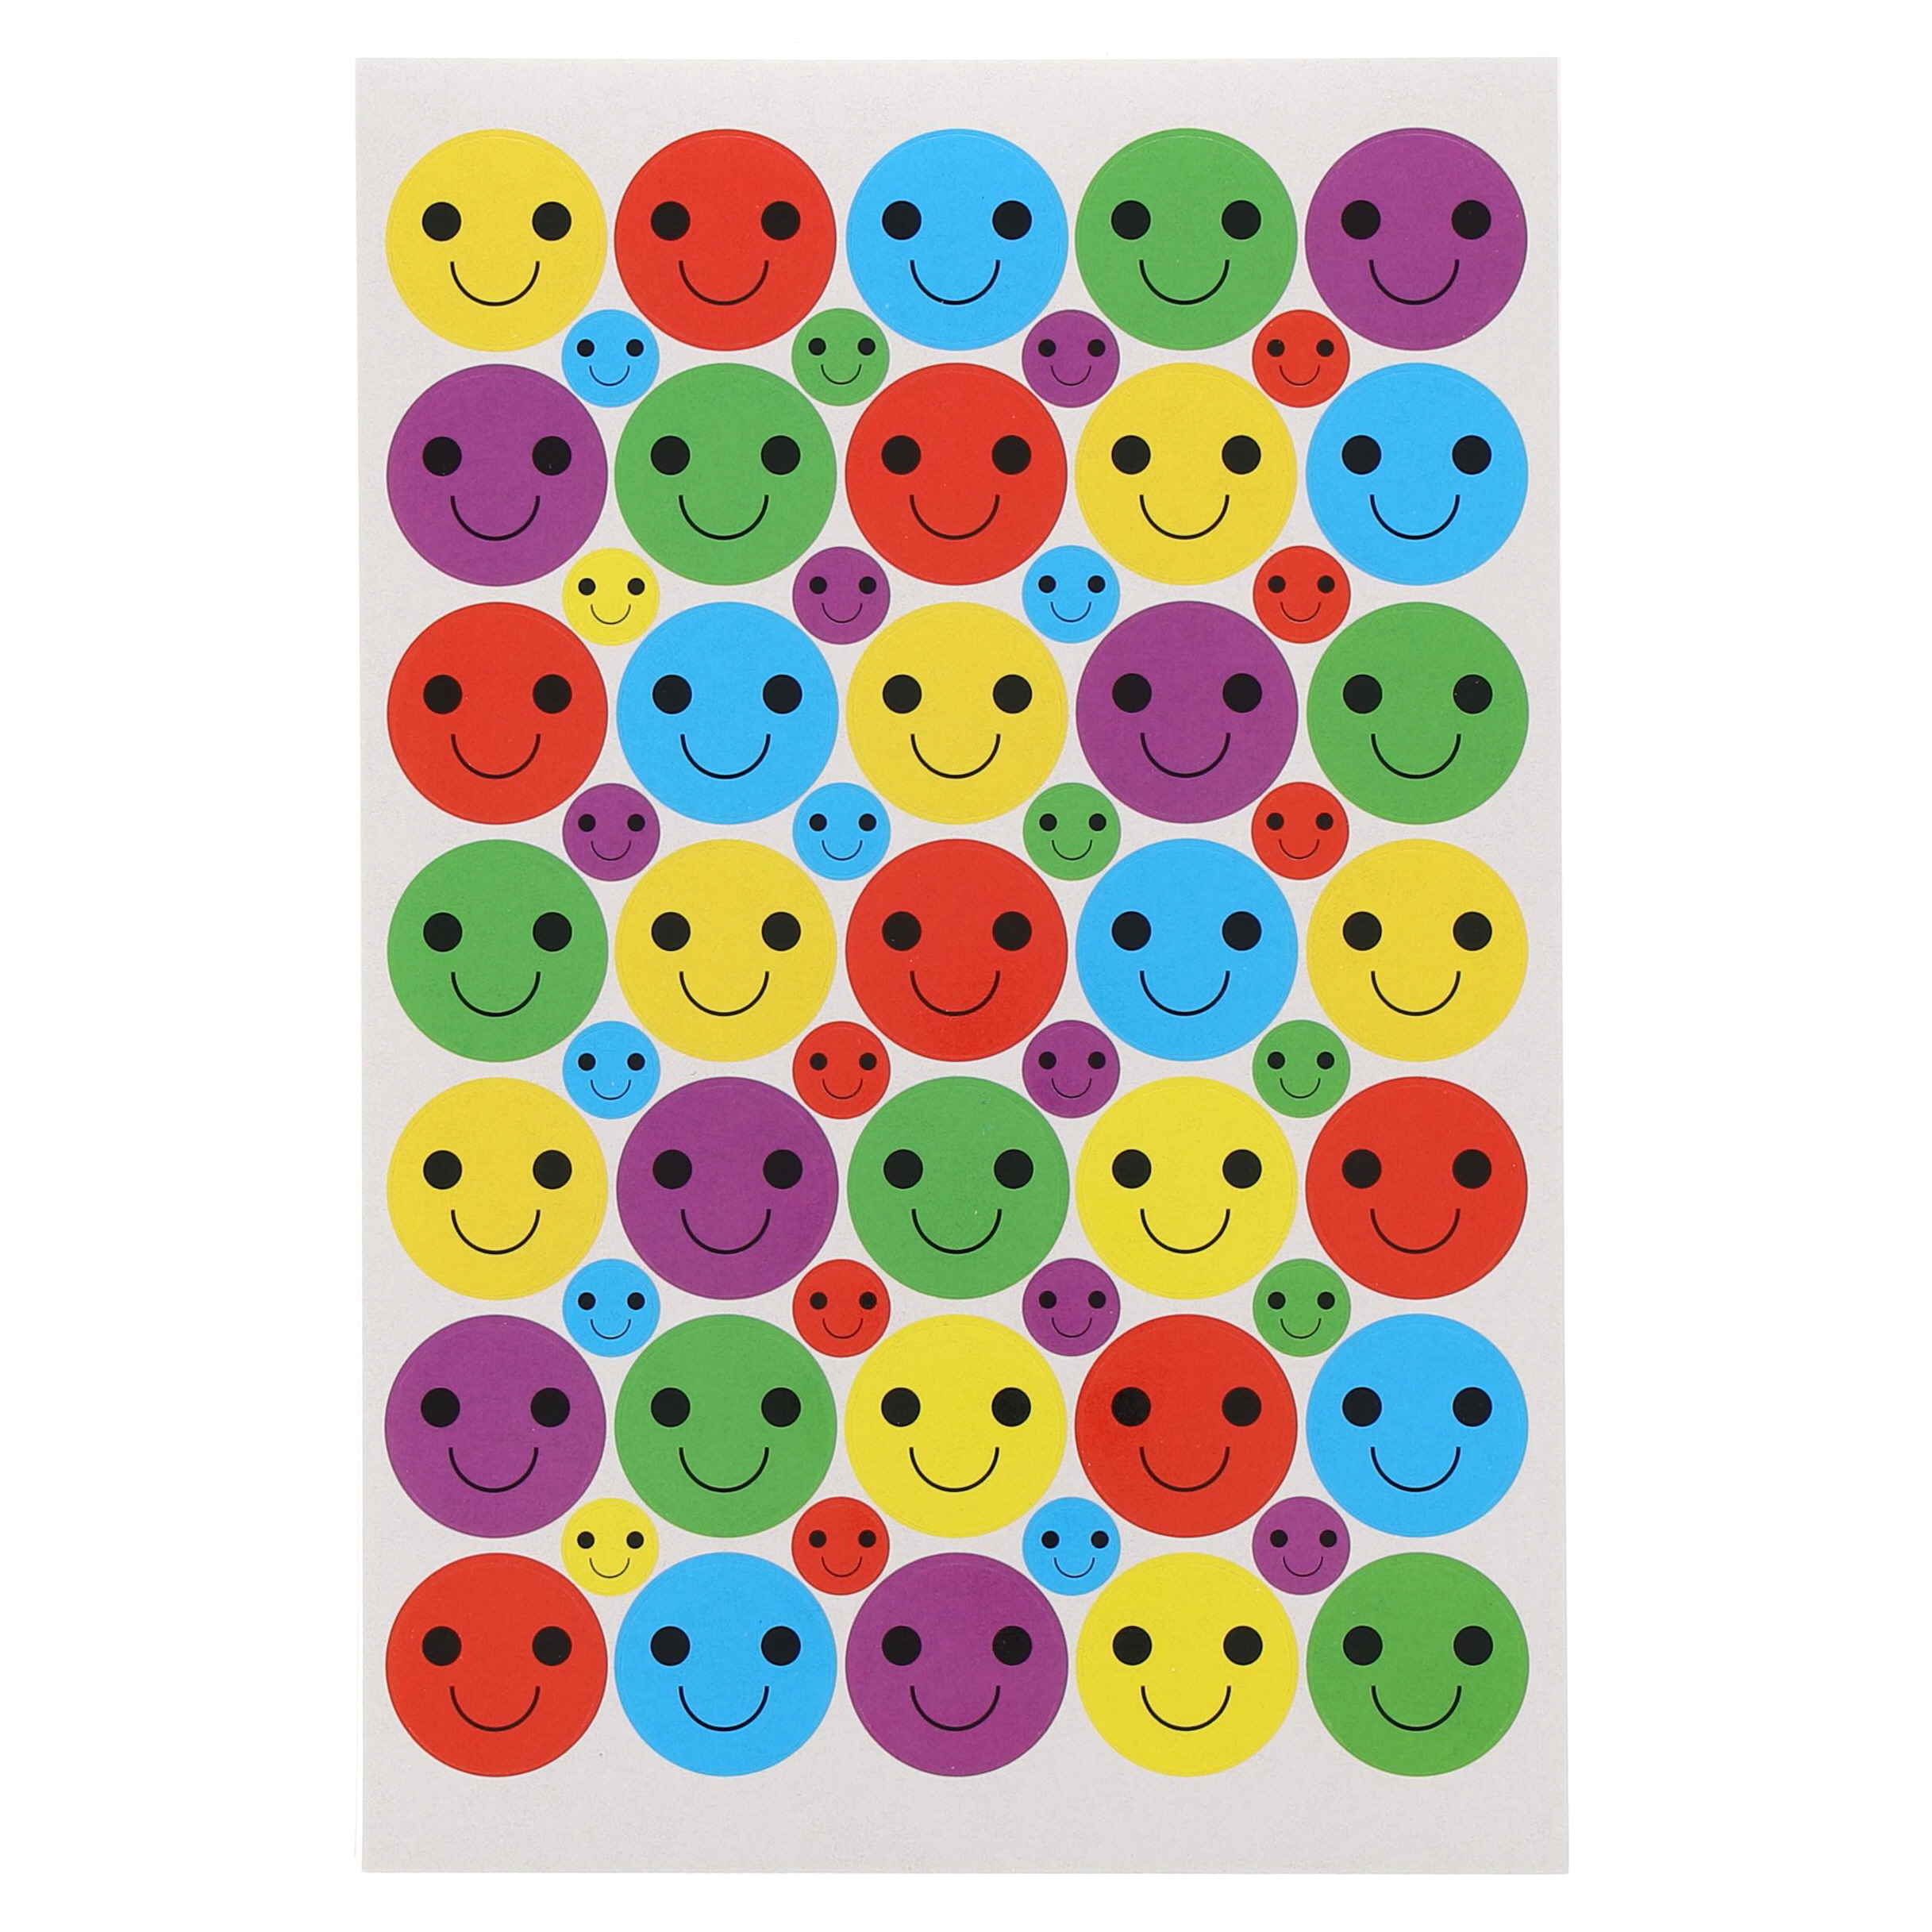 G1778949 - Classmates Bumper Pack of Smiley Stickers - 24mm and